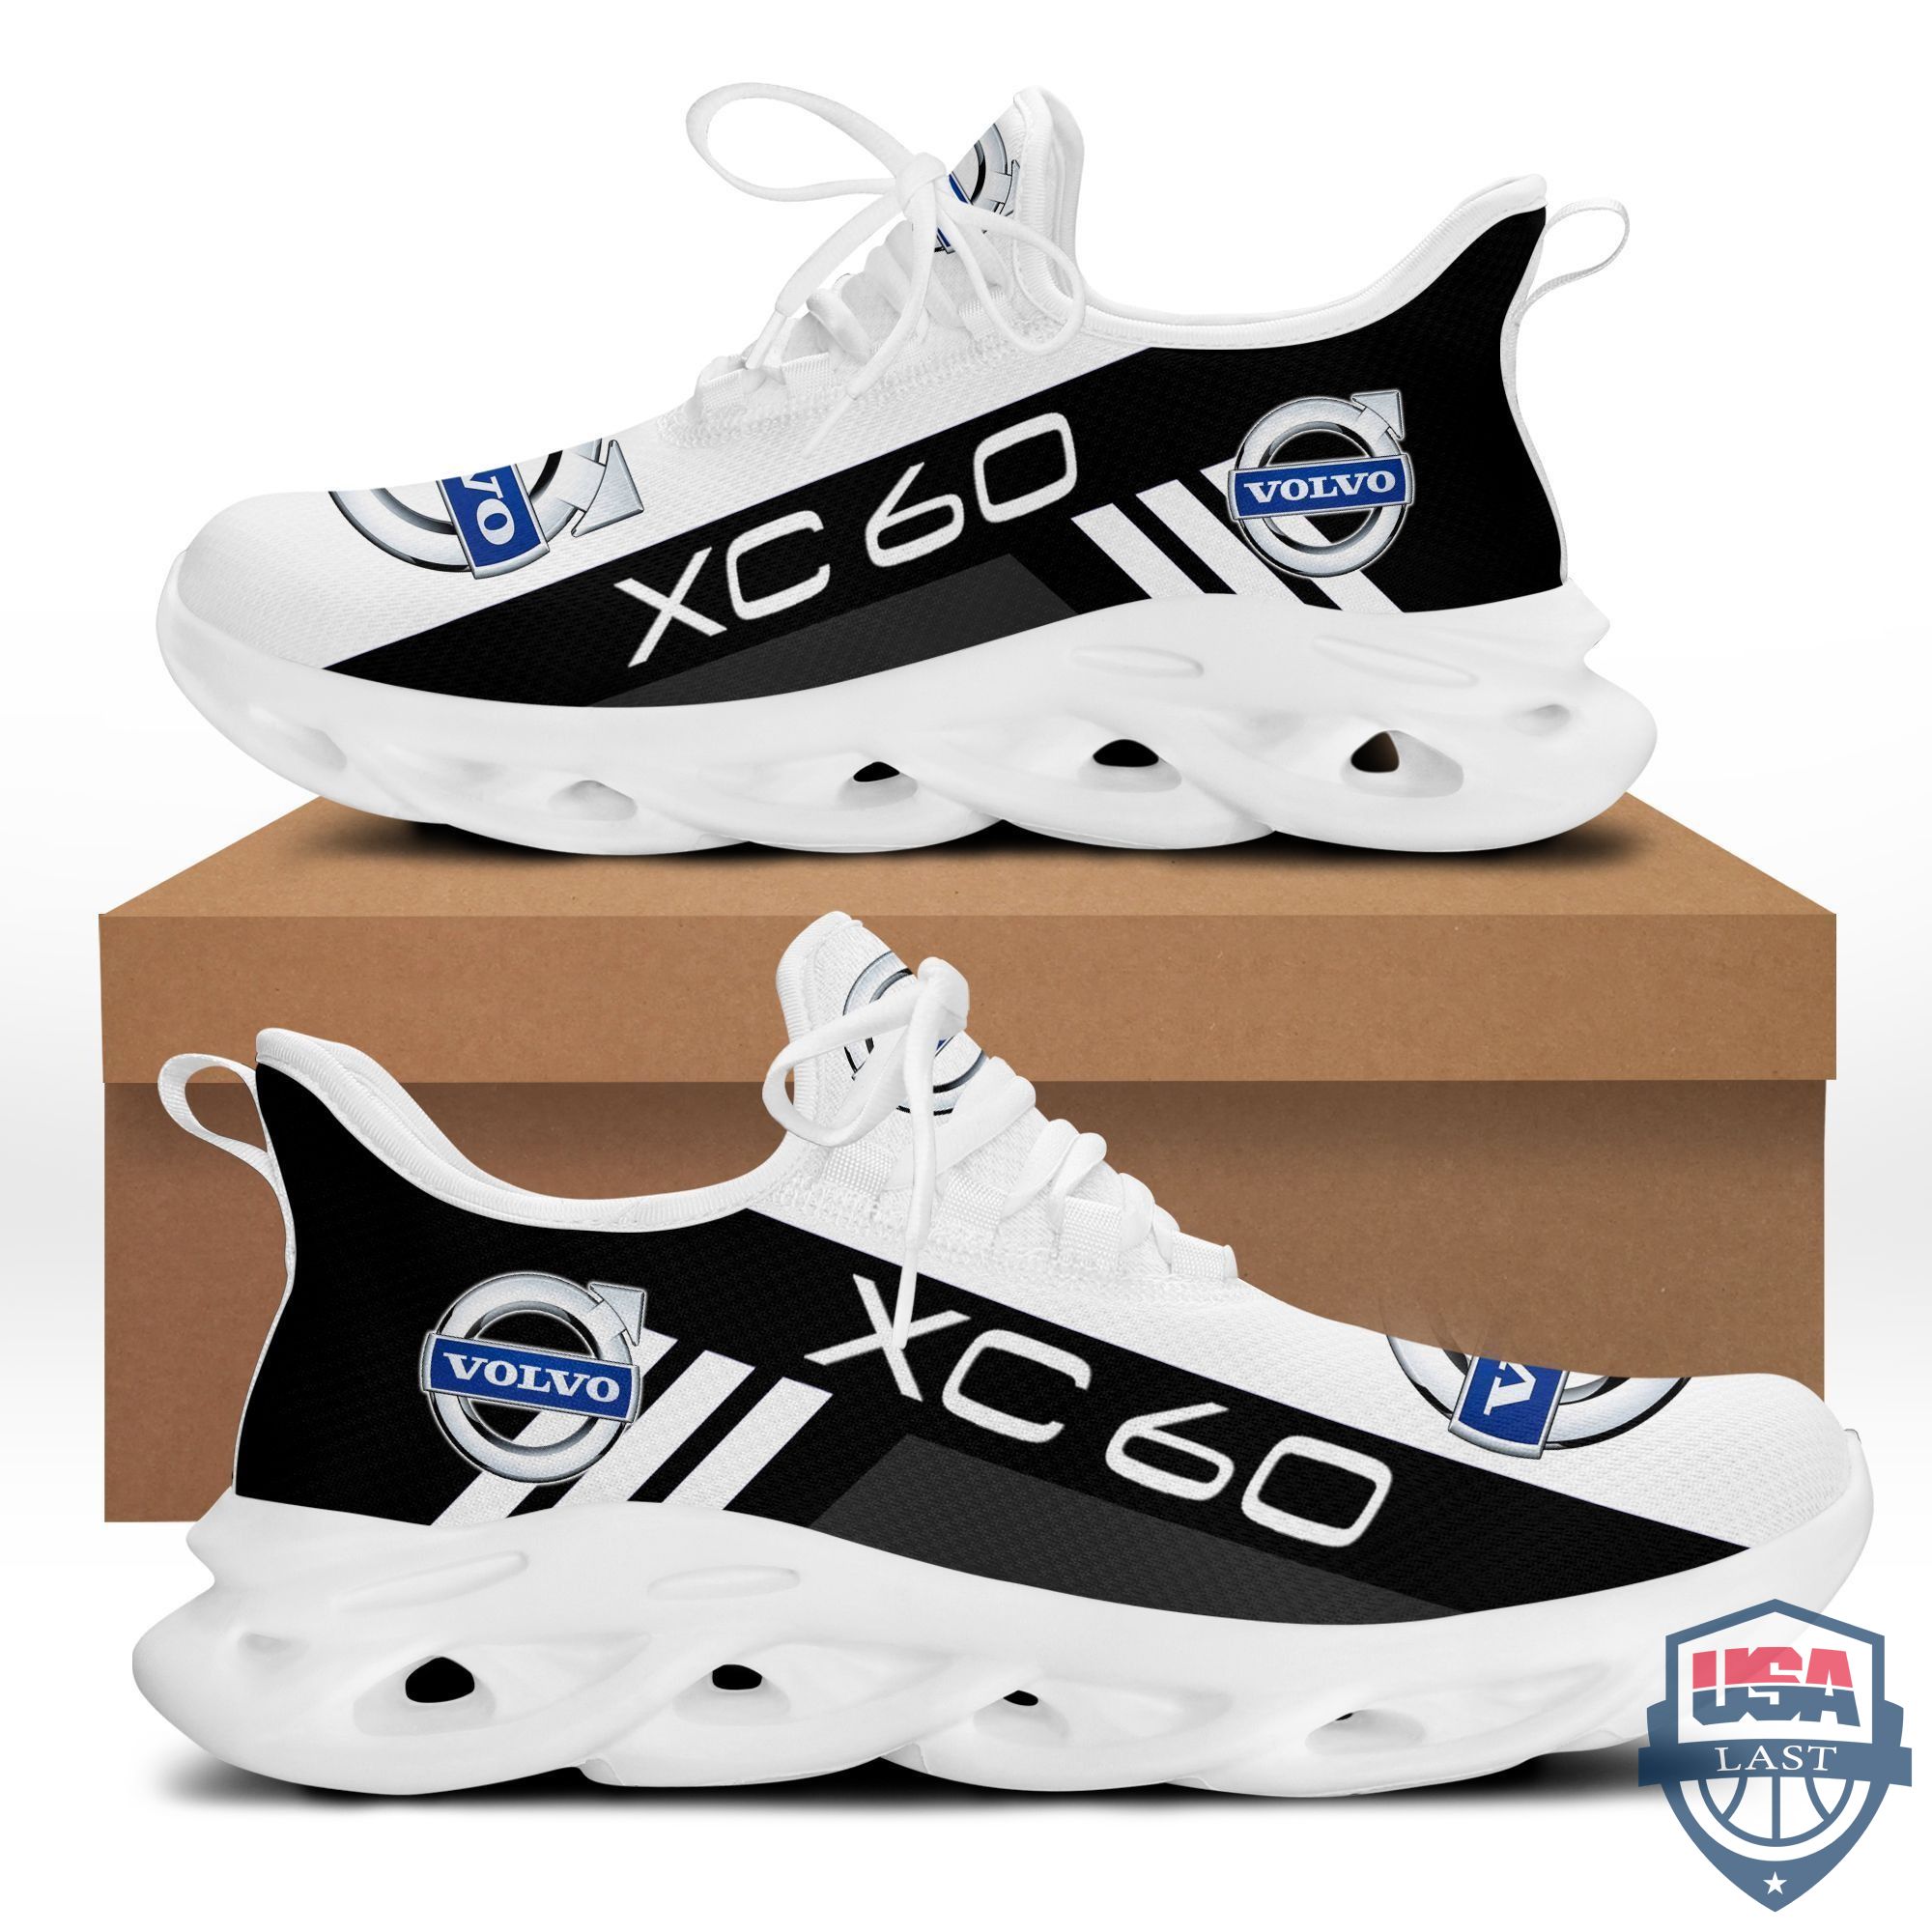 Top Trending – Volvo XC60 White Max Soul Sneaker Shoes